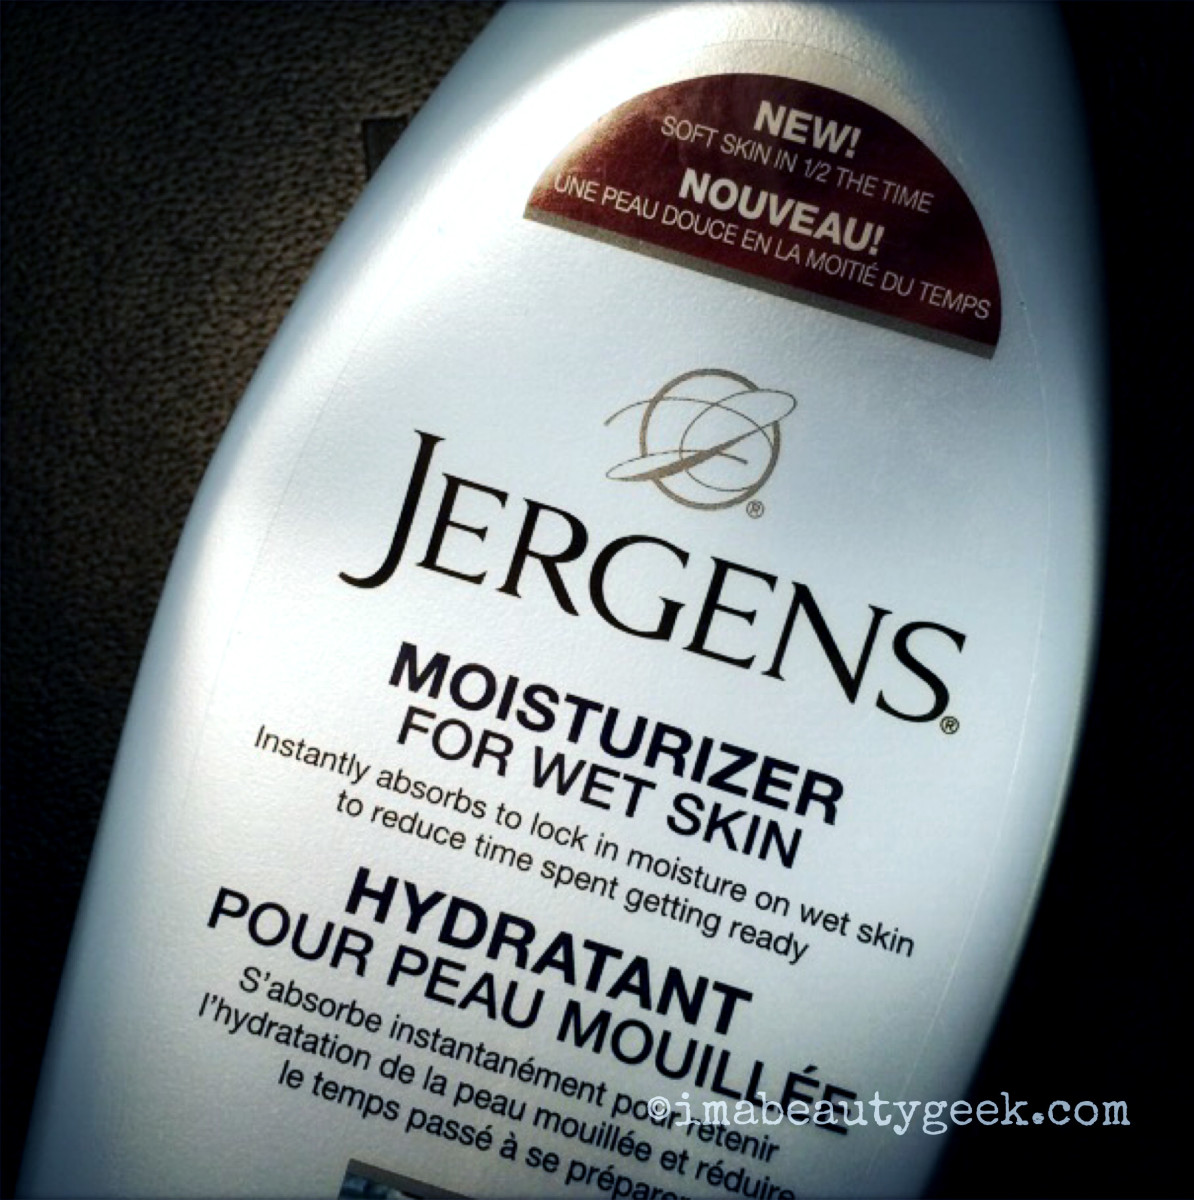 Jergens Moisturizer for Wet Skin is an in-shower moisturizer you don't need to rinse off